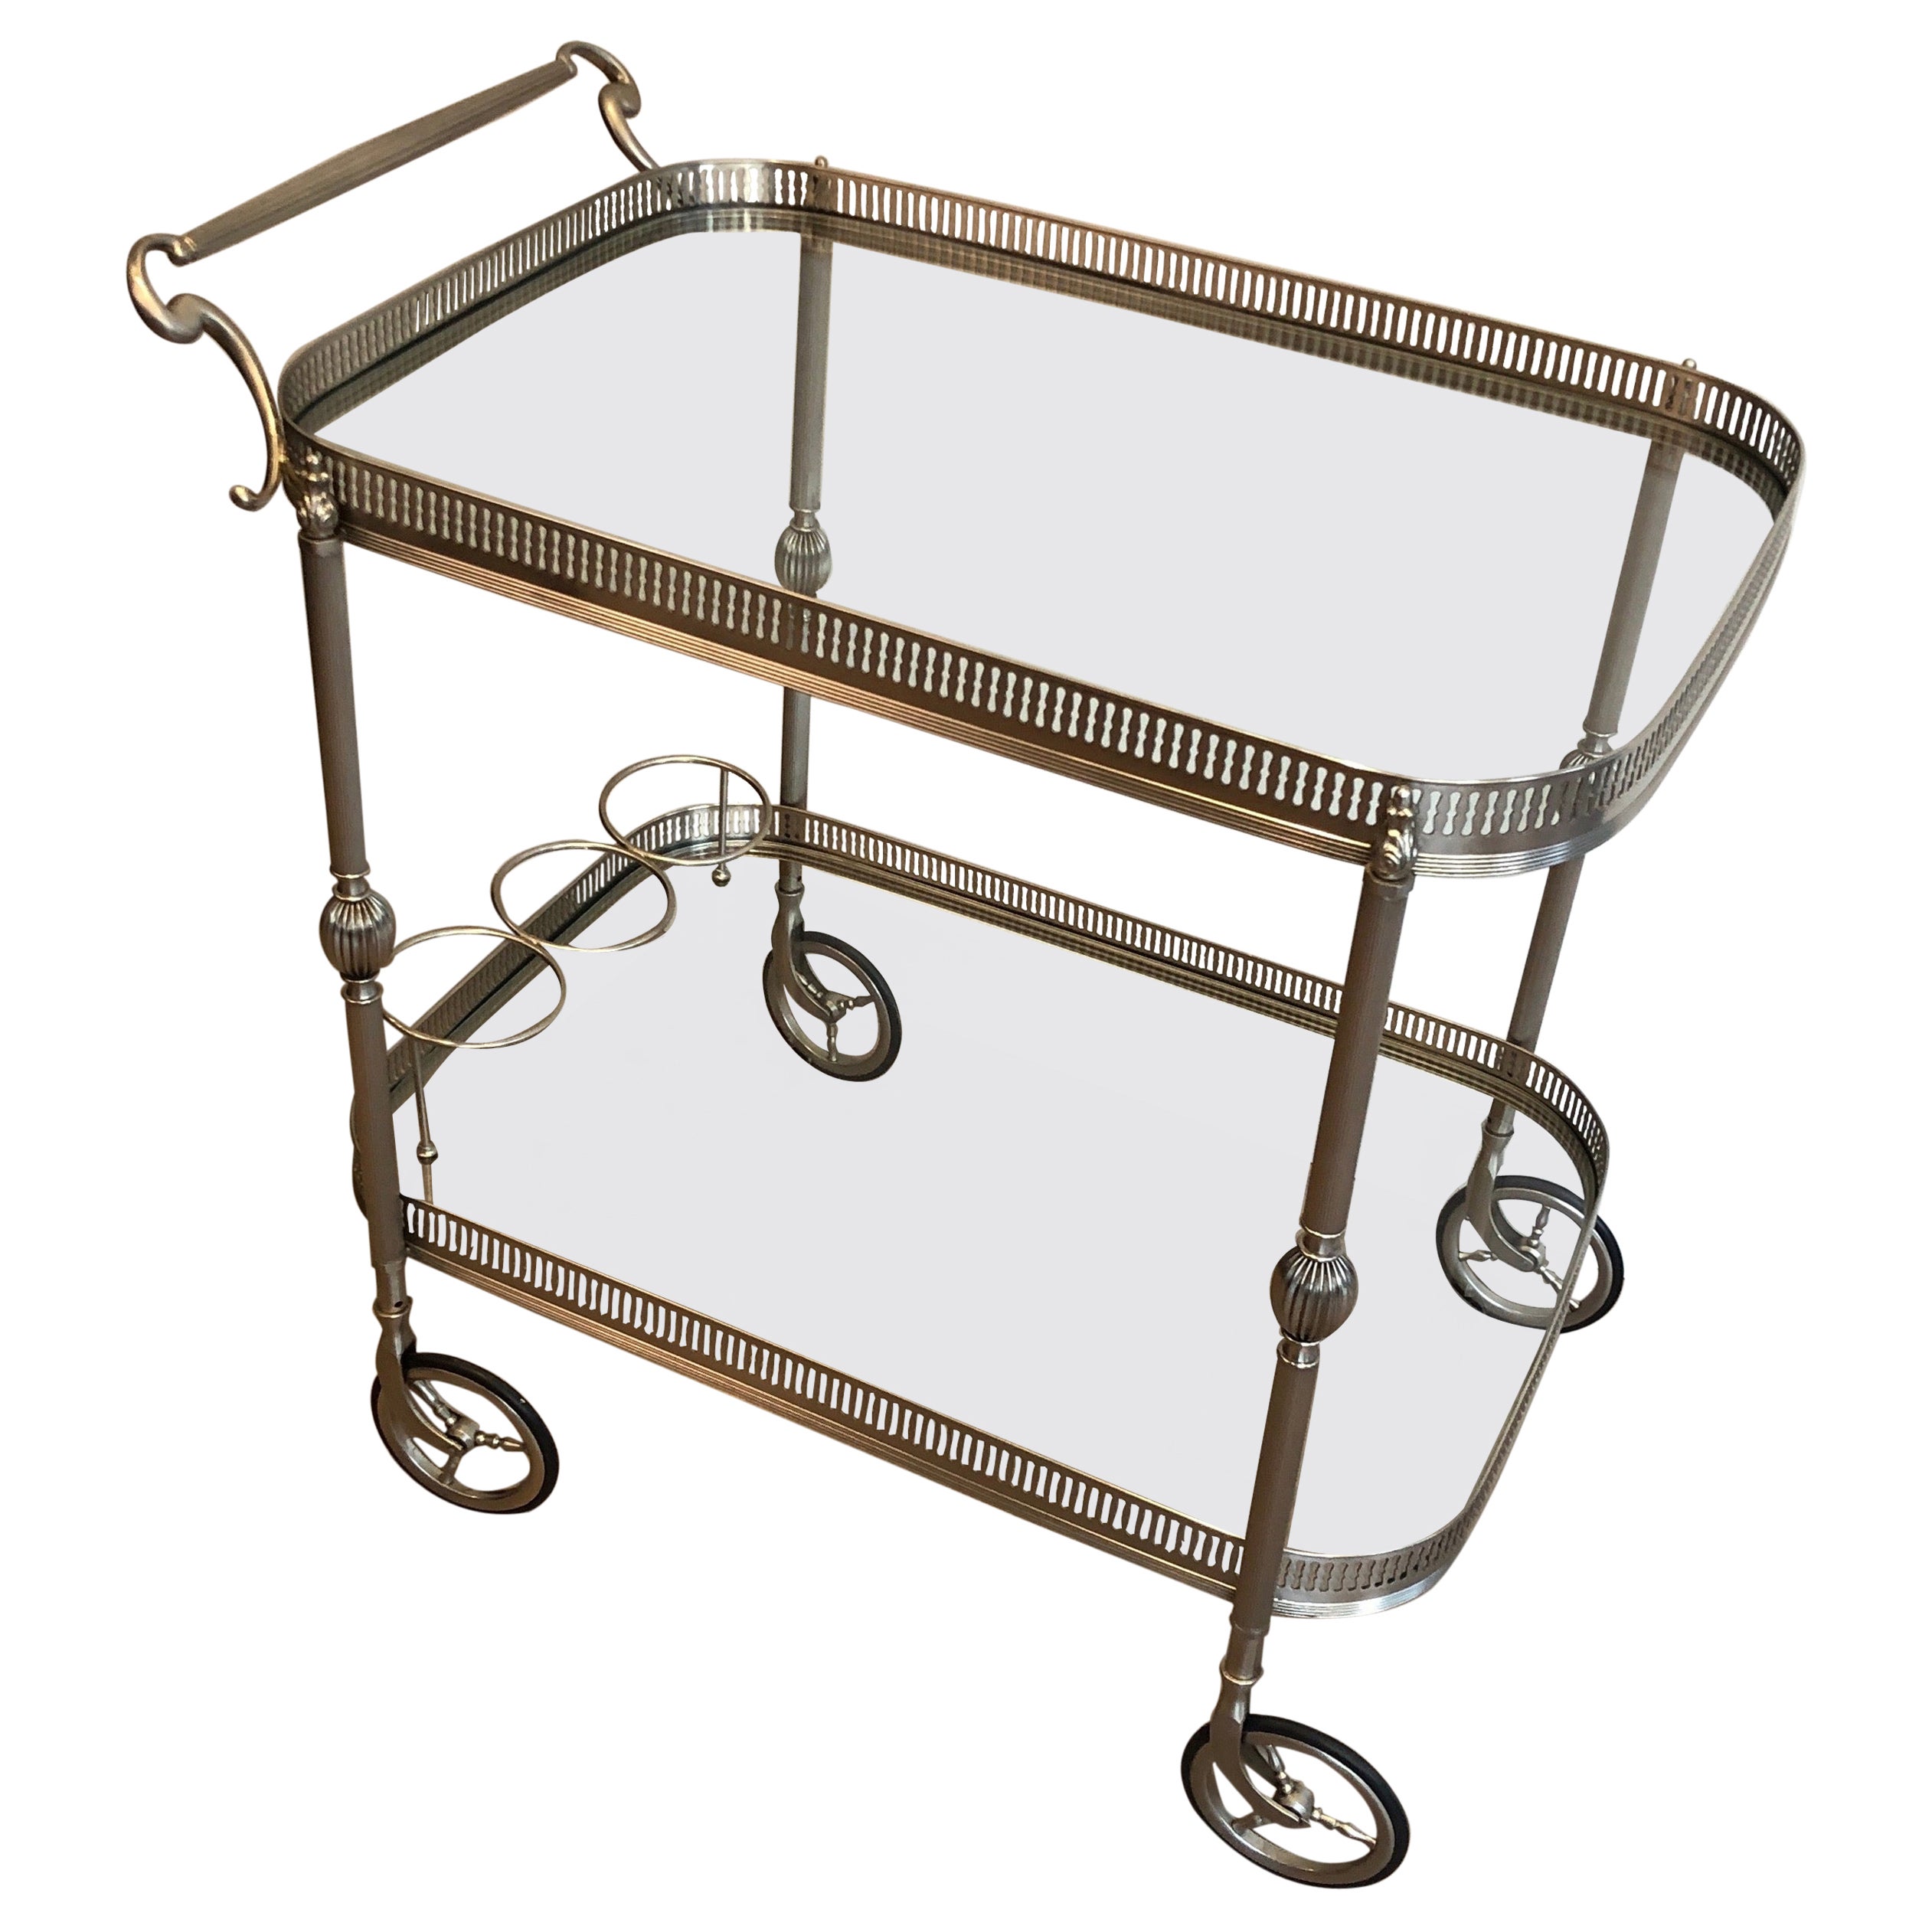 Neoclassical Silvered Brass Drinks Trolley in the Style of Maison Jansen. French